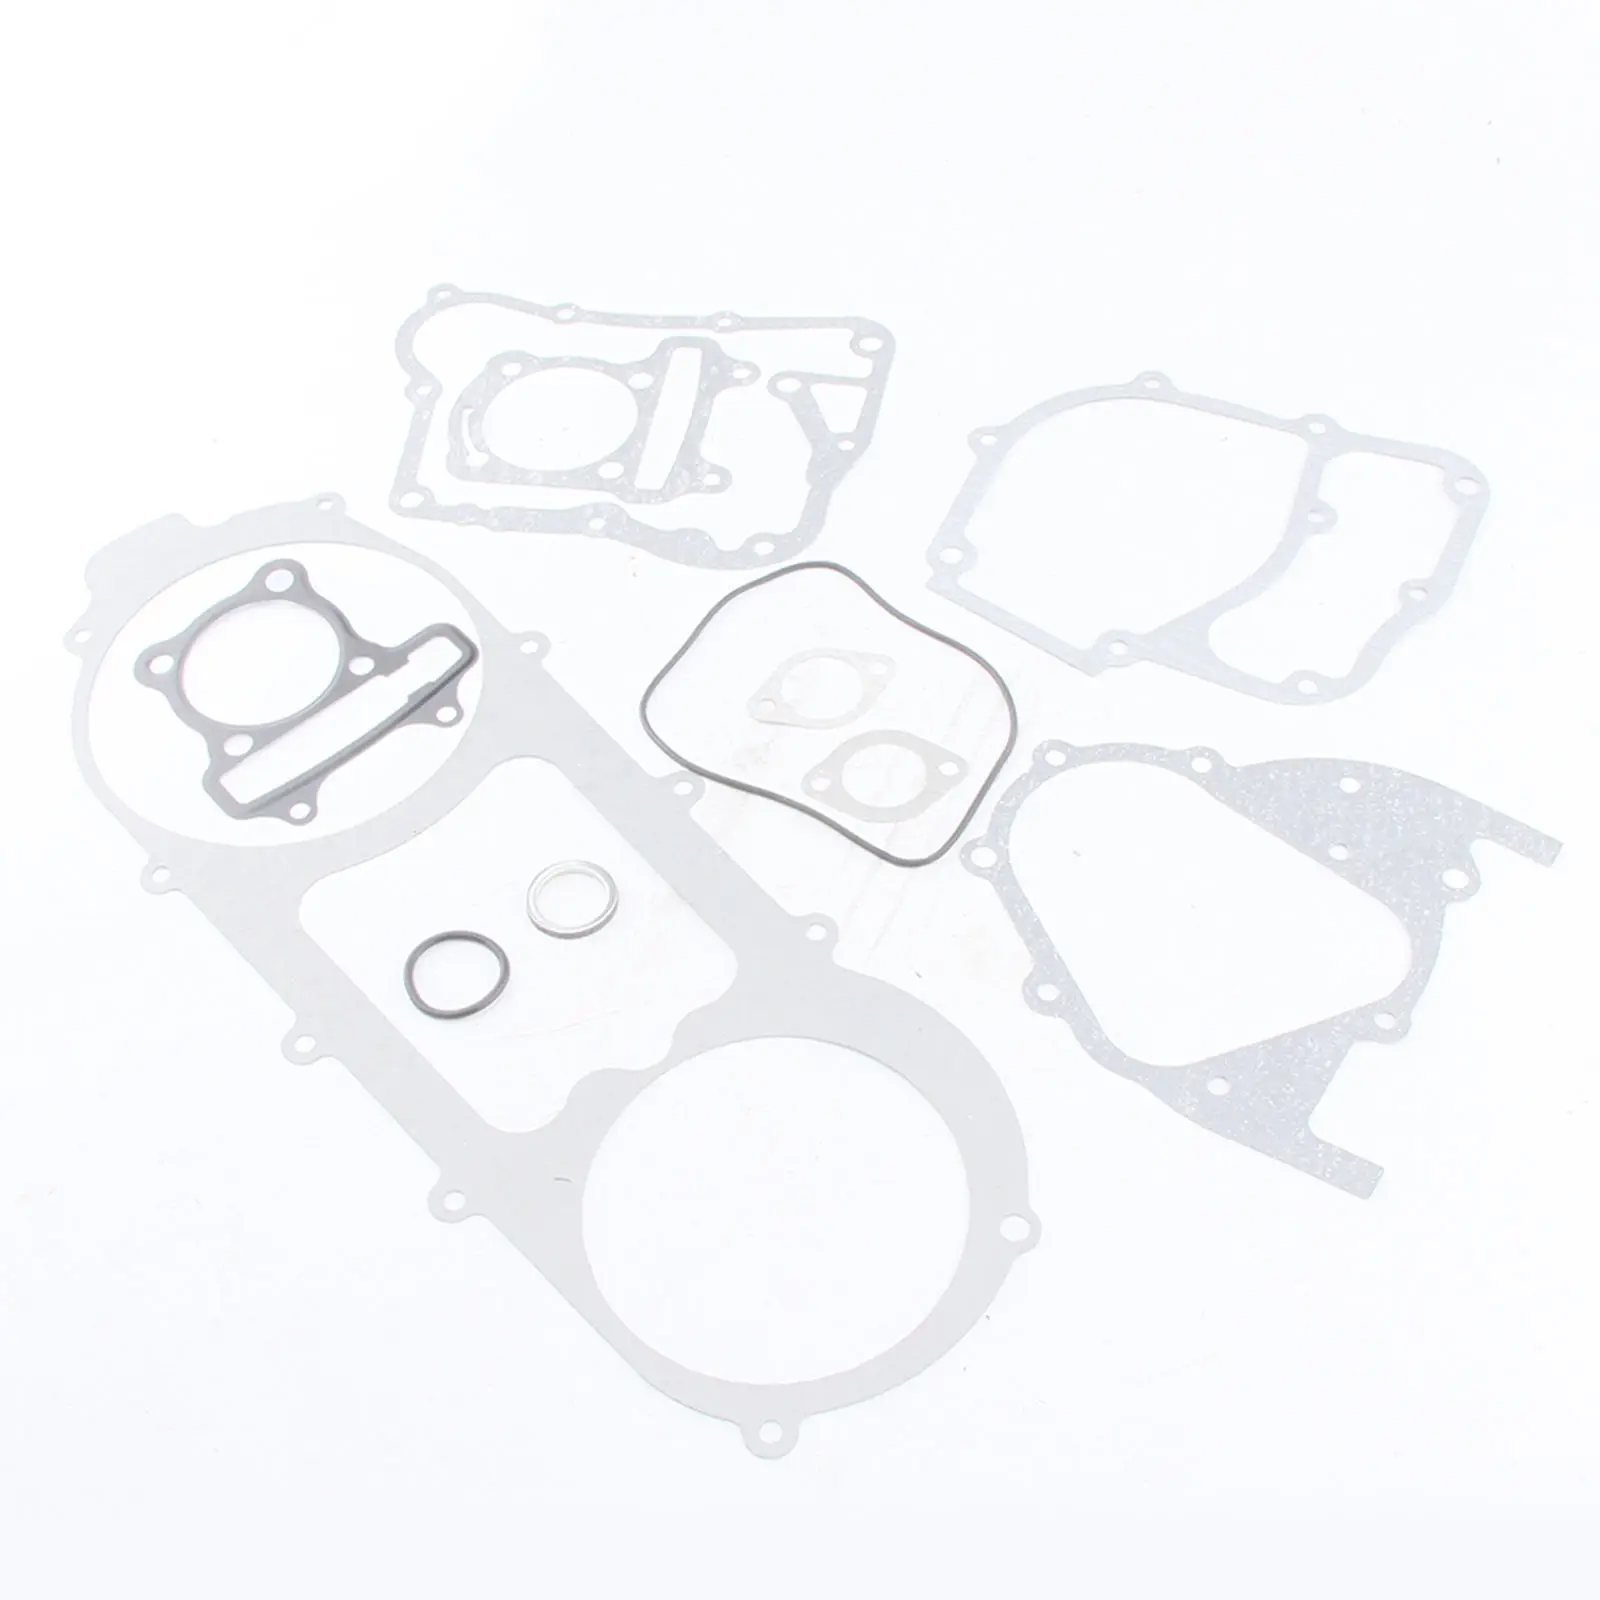 Complete Engine Head Gasket Kit Set for GY6 150cc Moped Scooters ATVs Go Karts